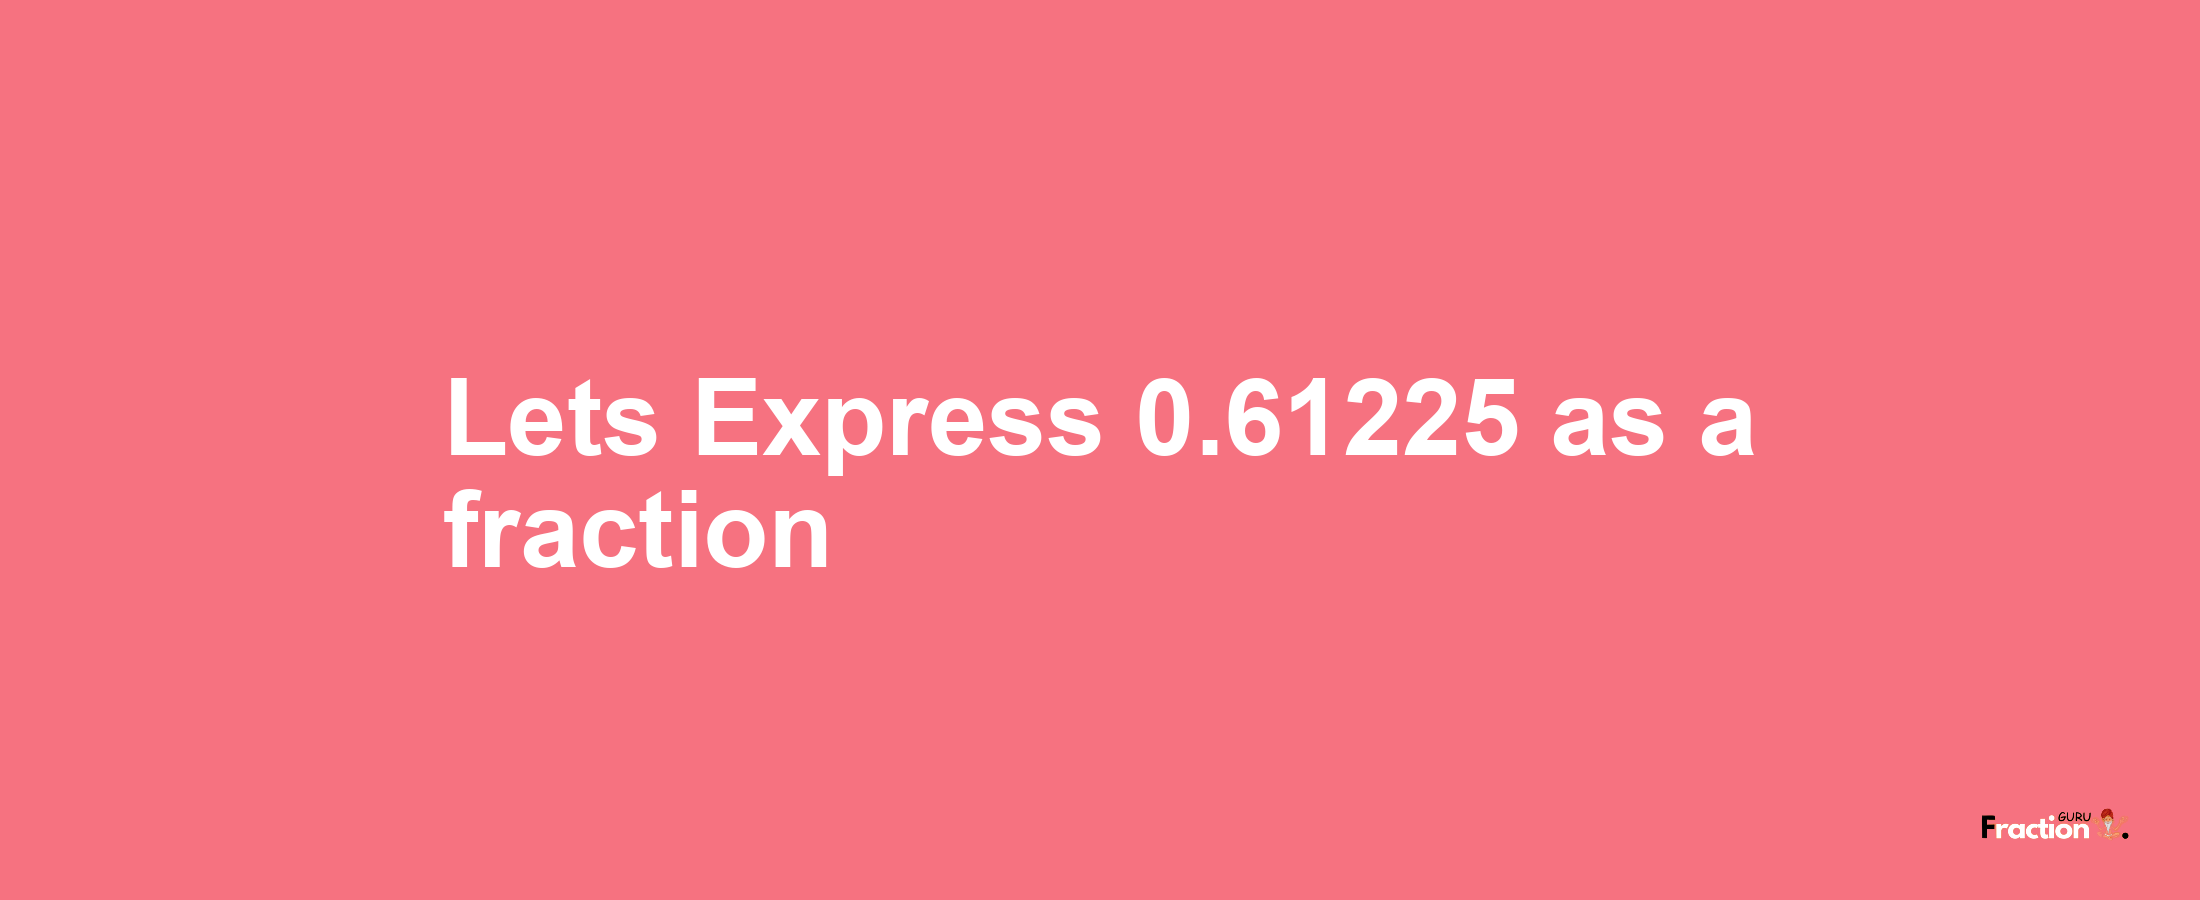 Lets Express 0.61225 as afraction